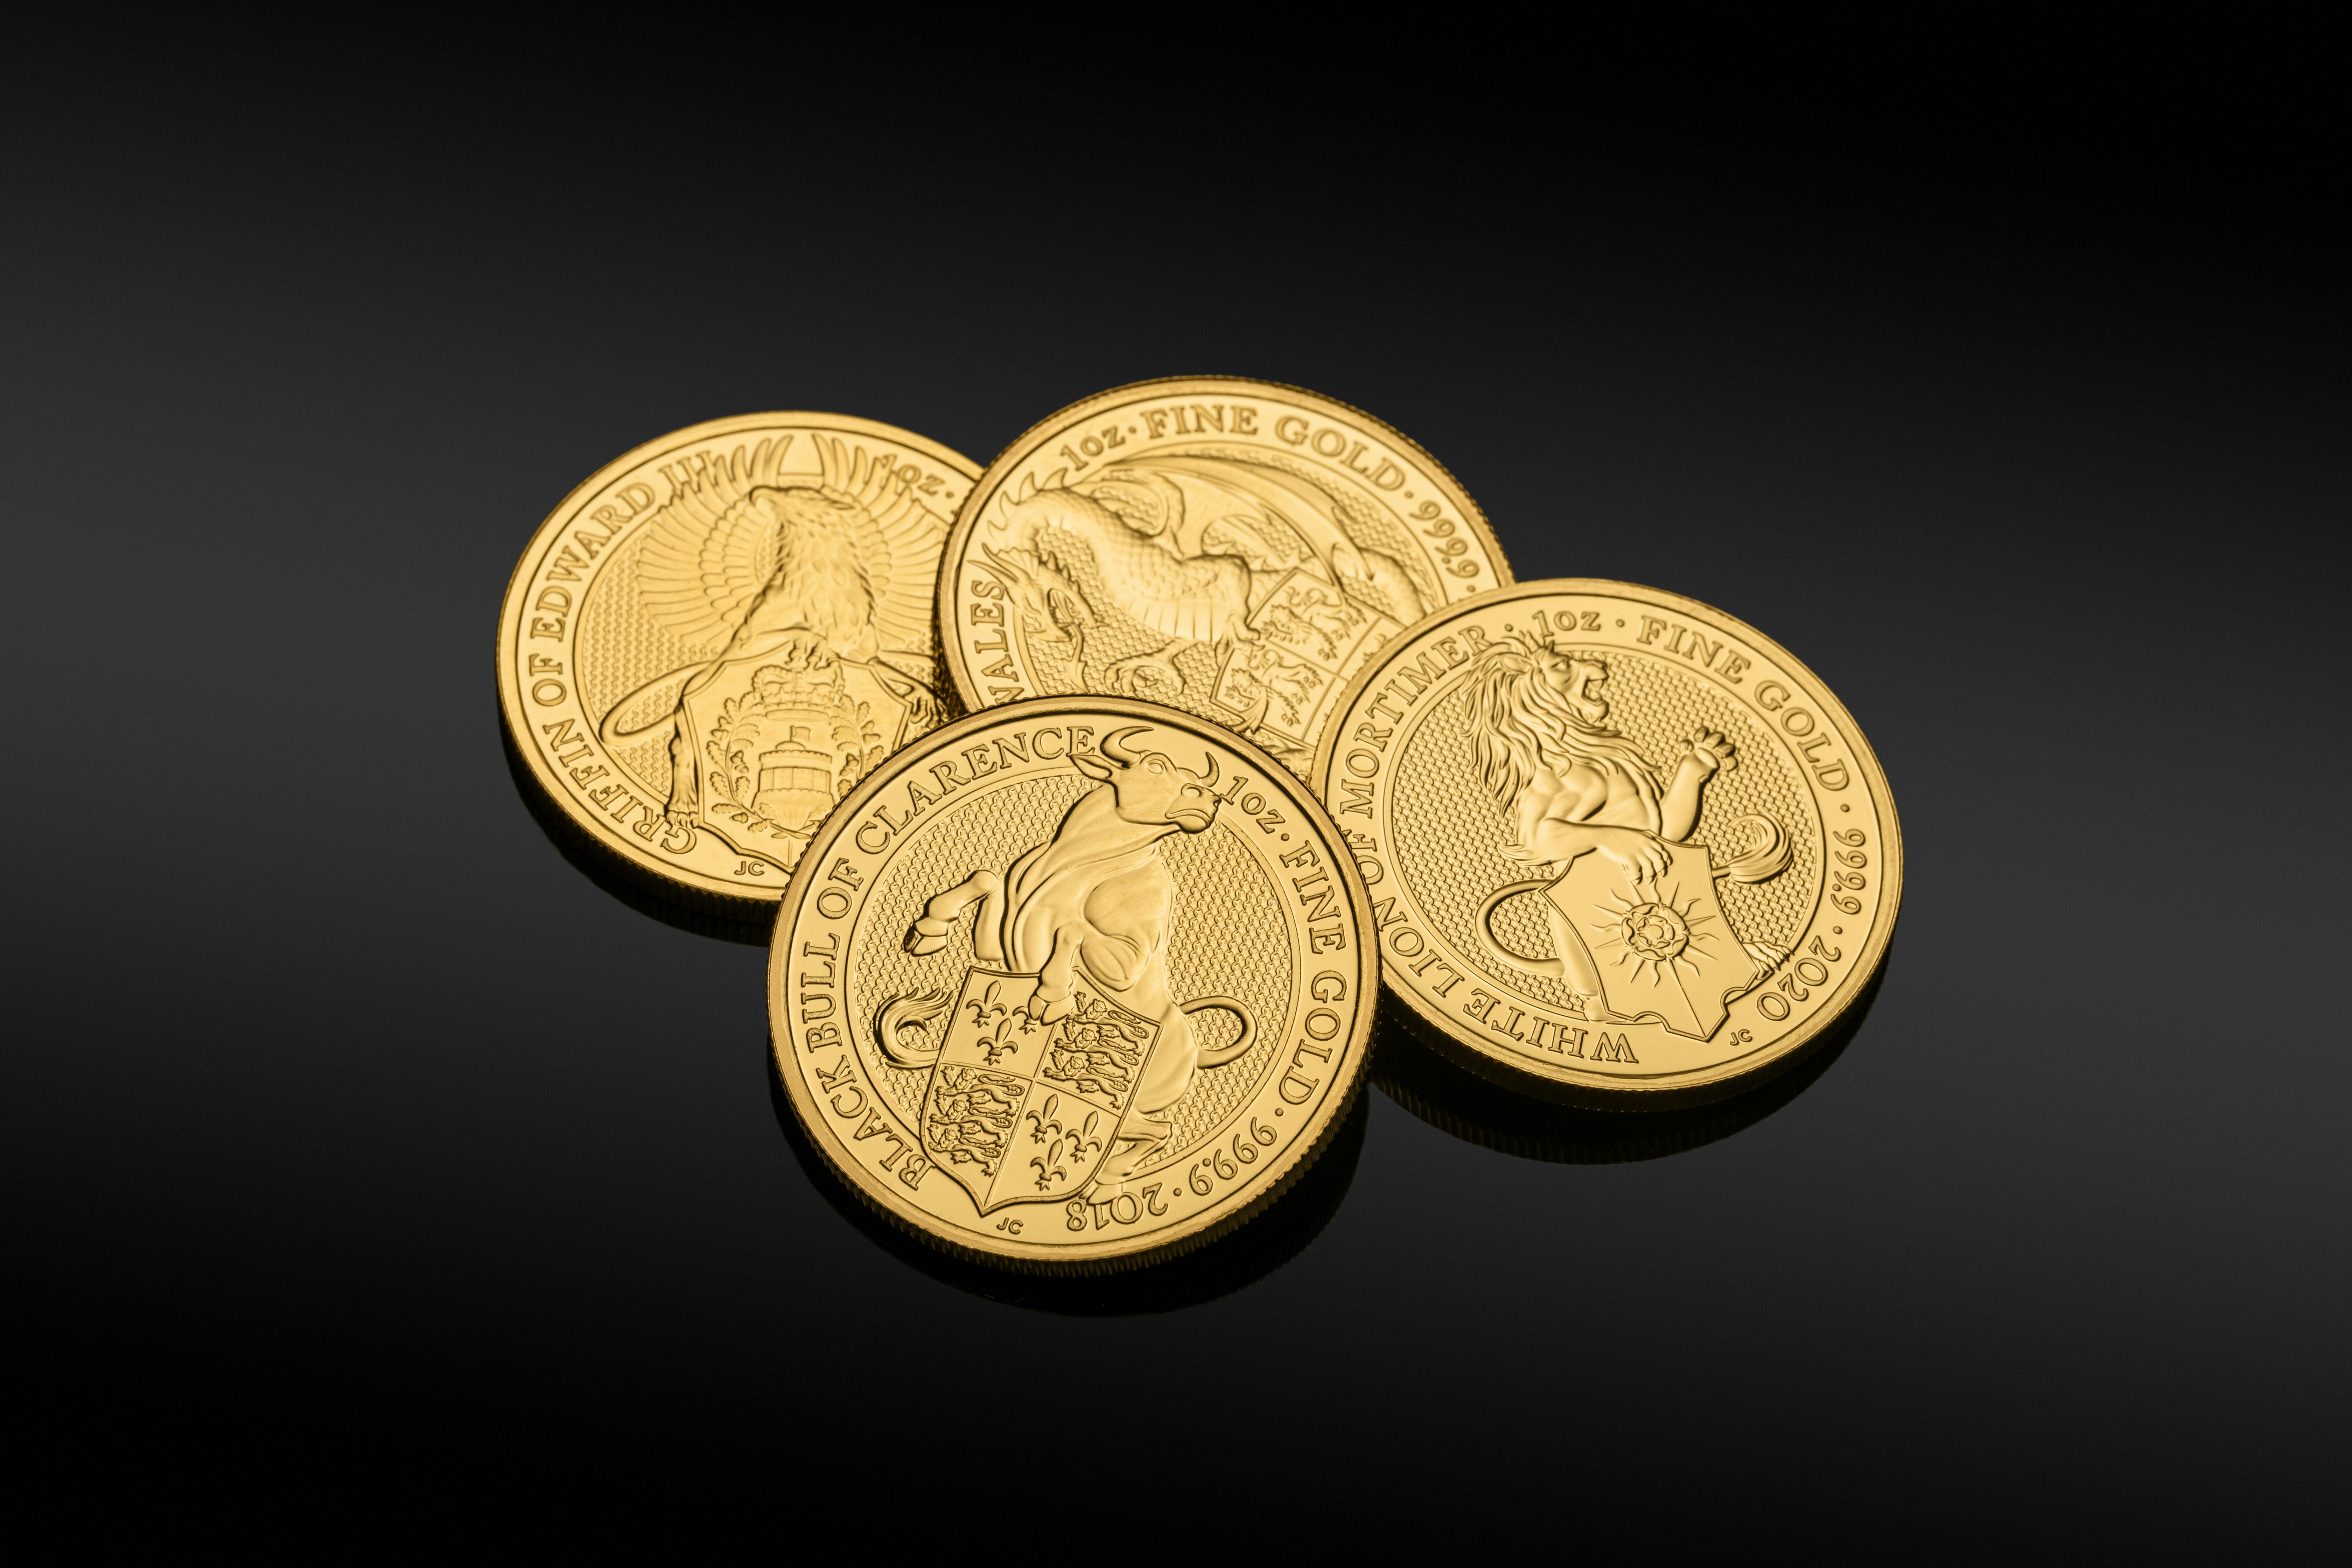 Gold Round Coins on Black Surface · Free Stock Photo